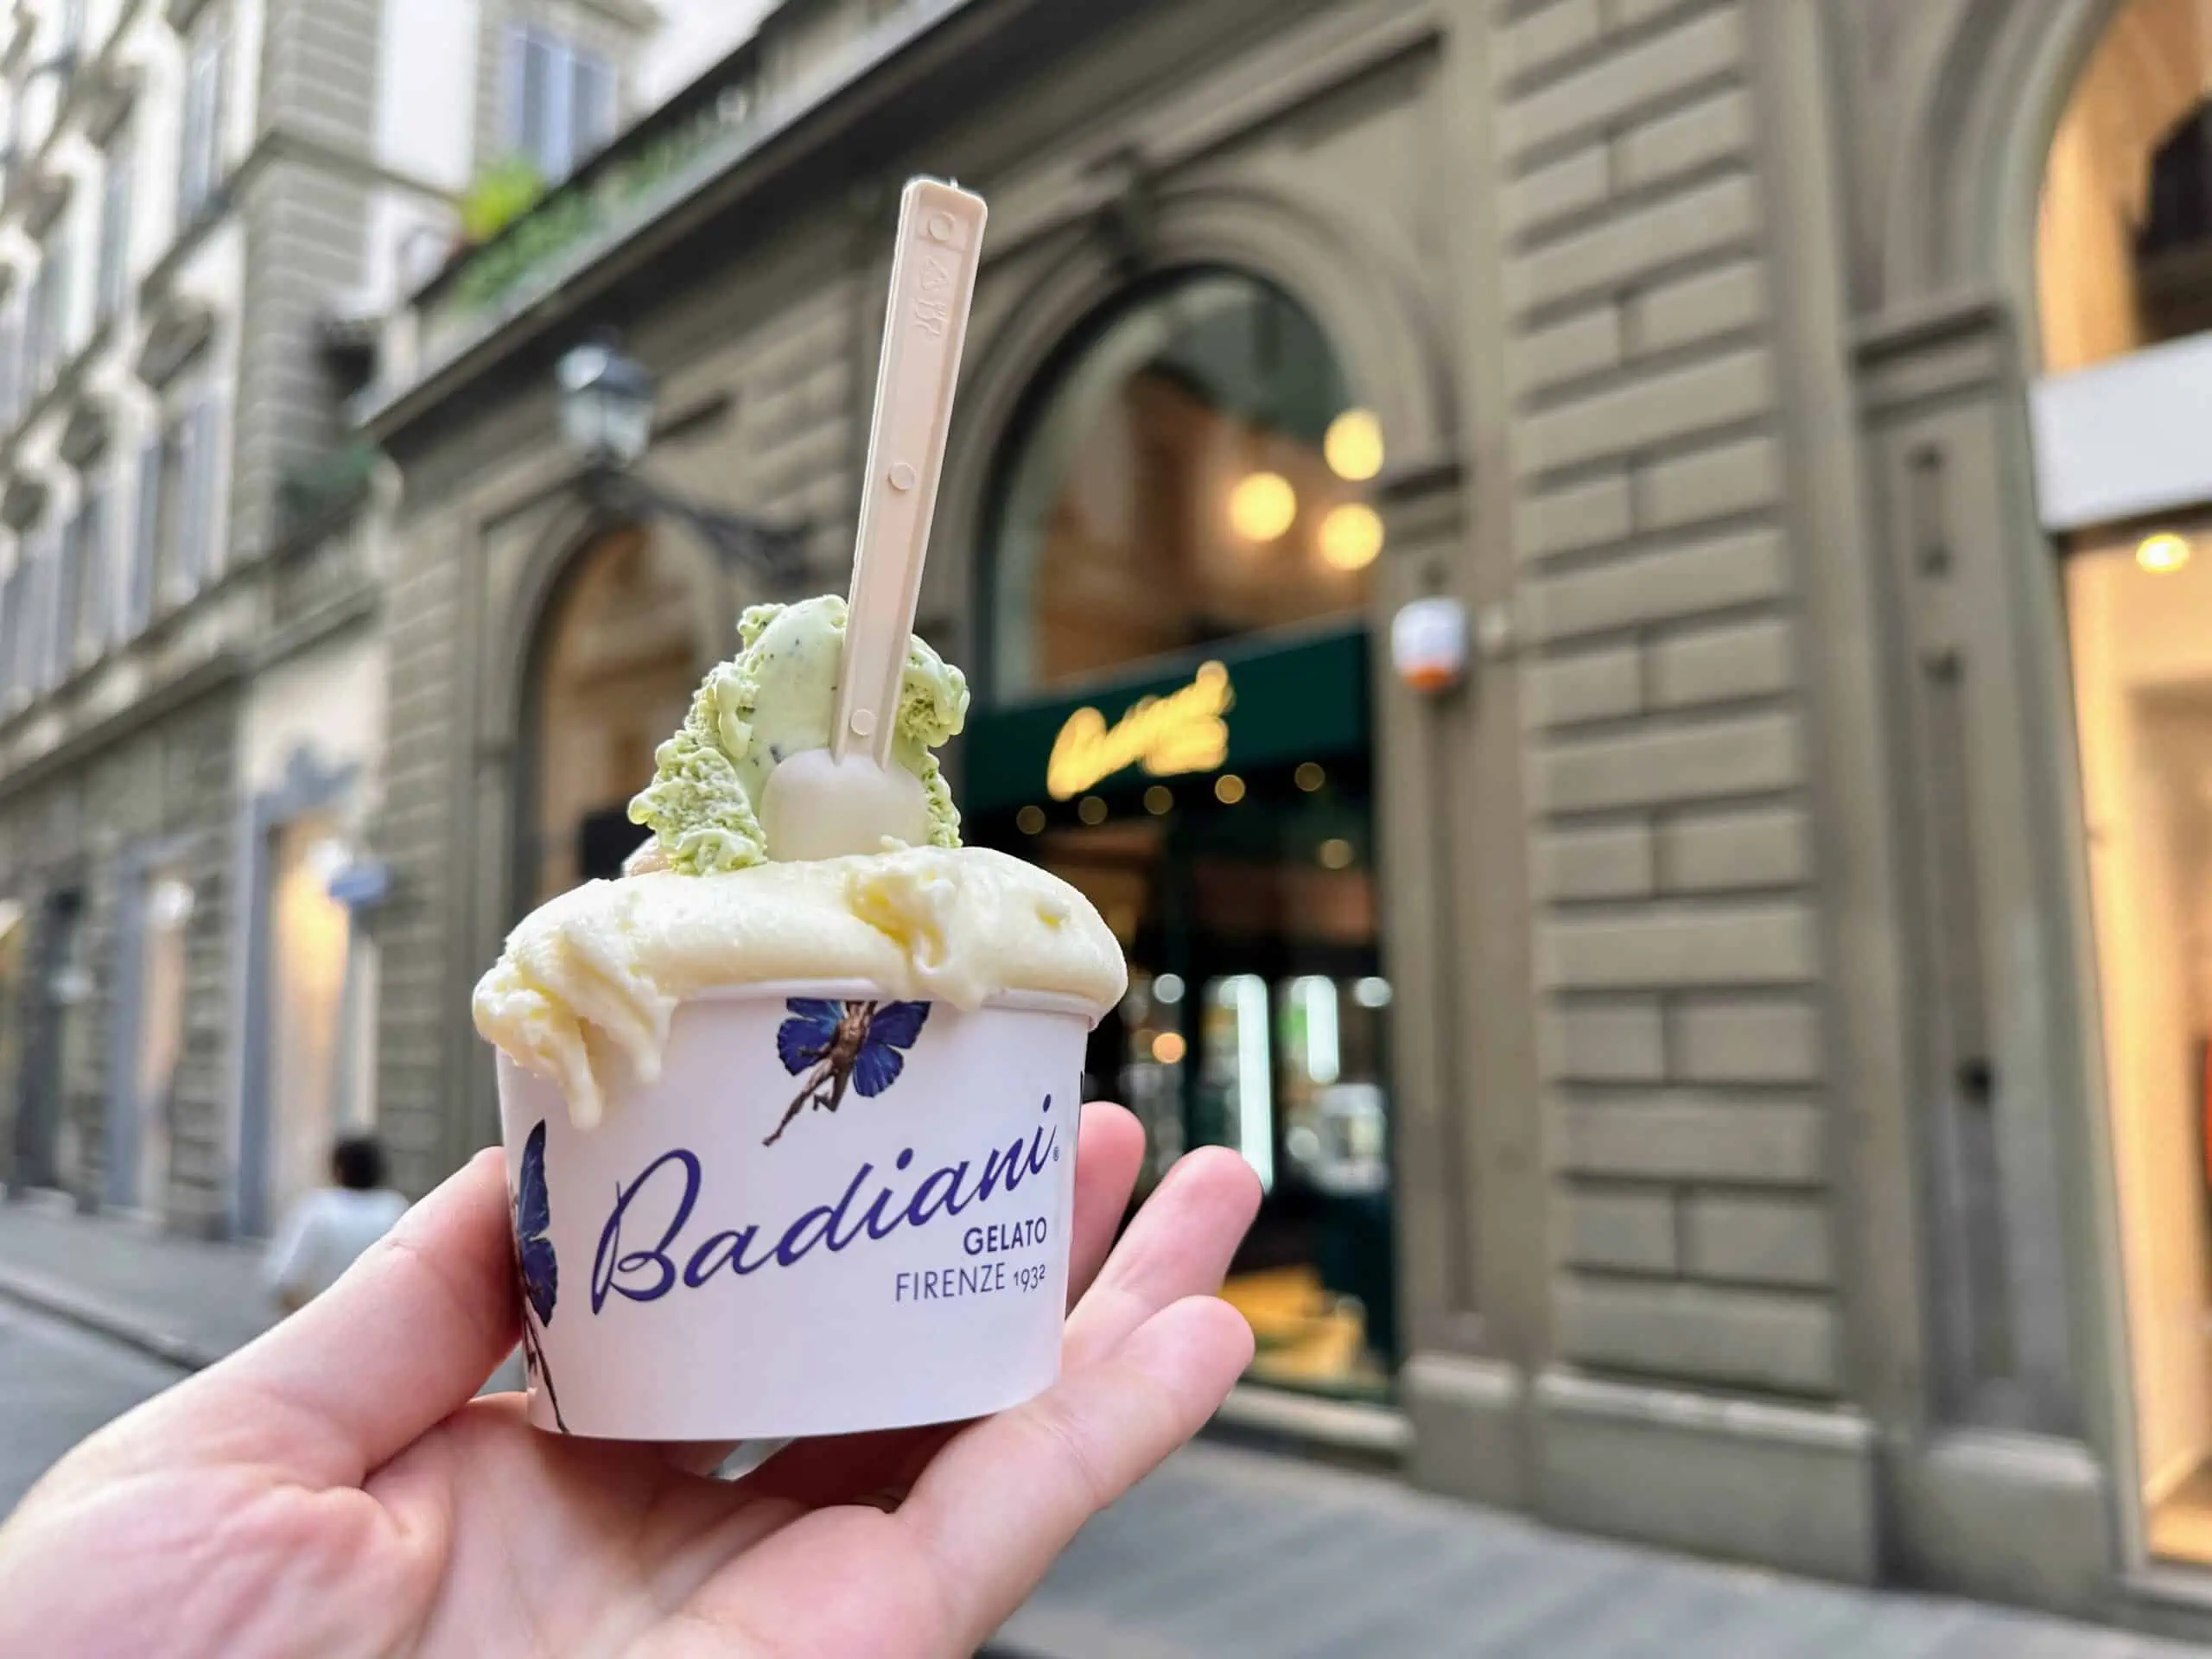 Hand holding cup of Badiani gelato in front of the shop in Florence, Italy.